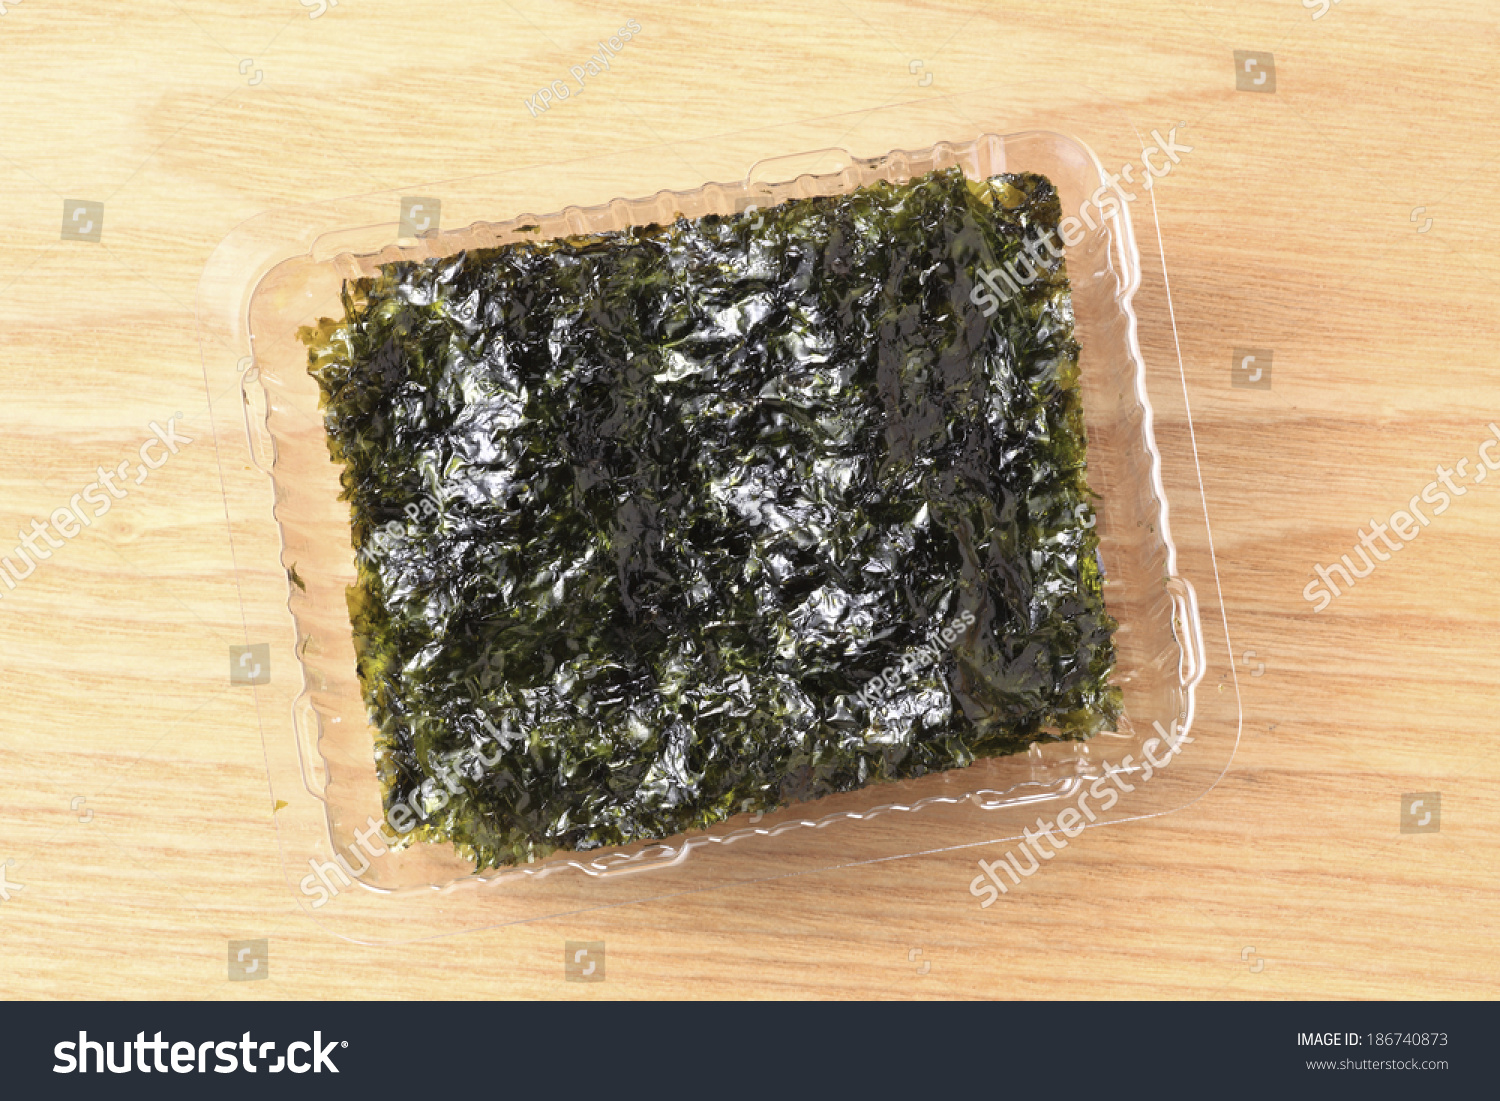 Download Image Korean Seaweed Plastic Container On Food And Drink Stock Image 186740873 Yellowimages Mockups